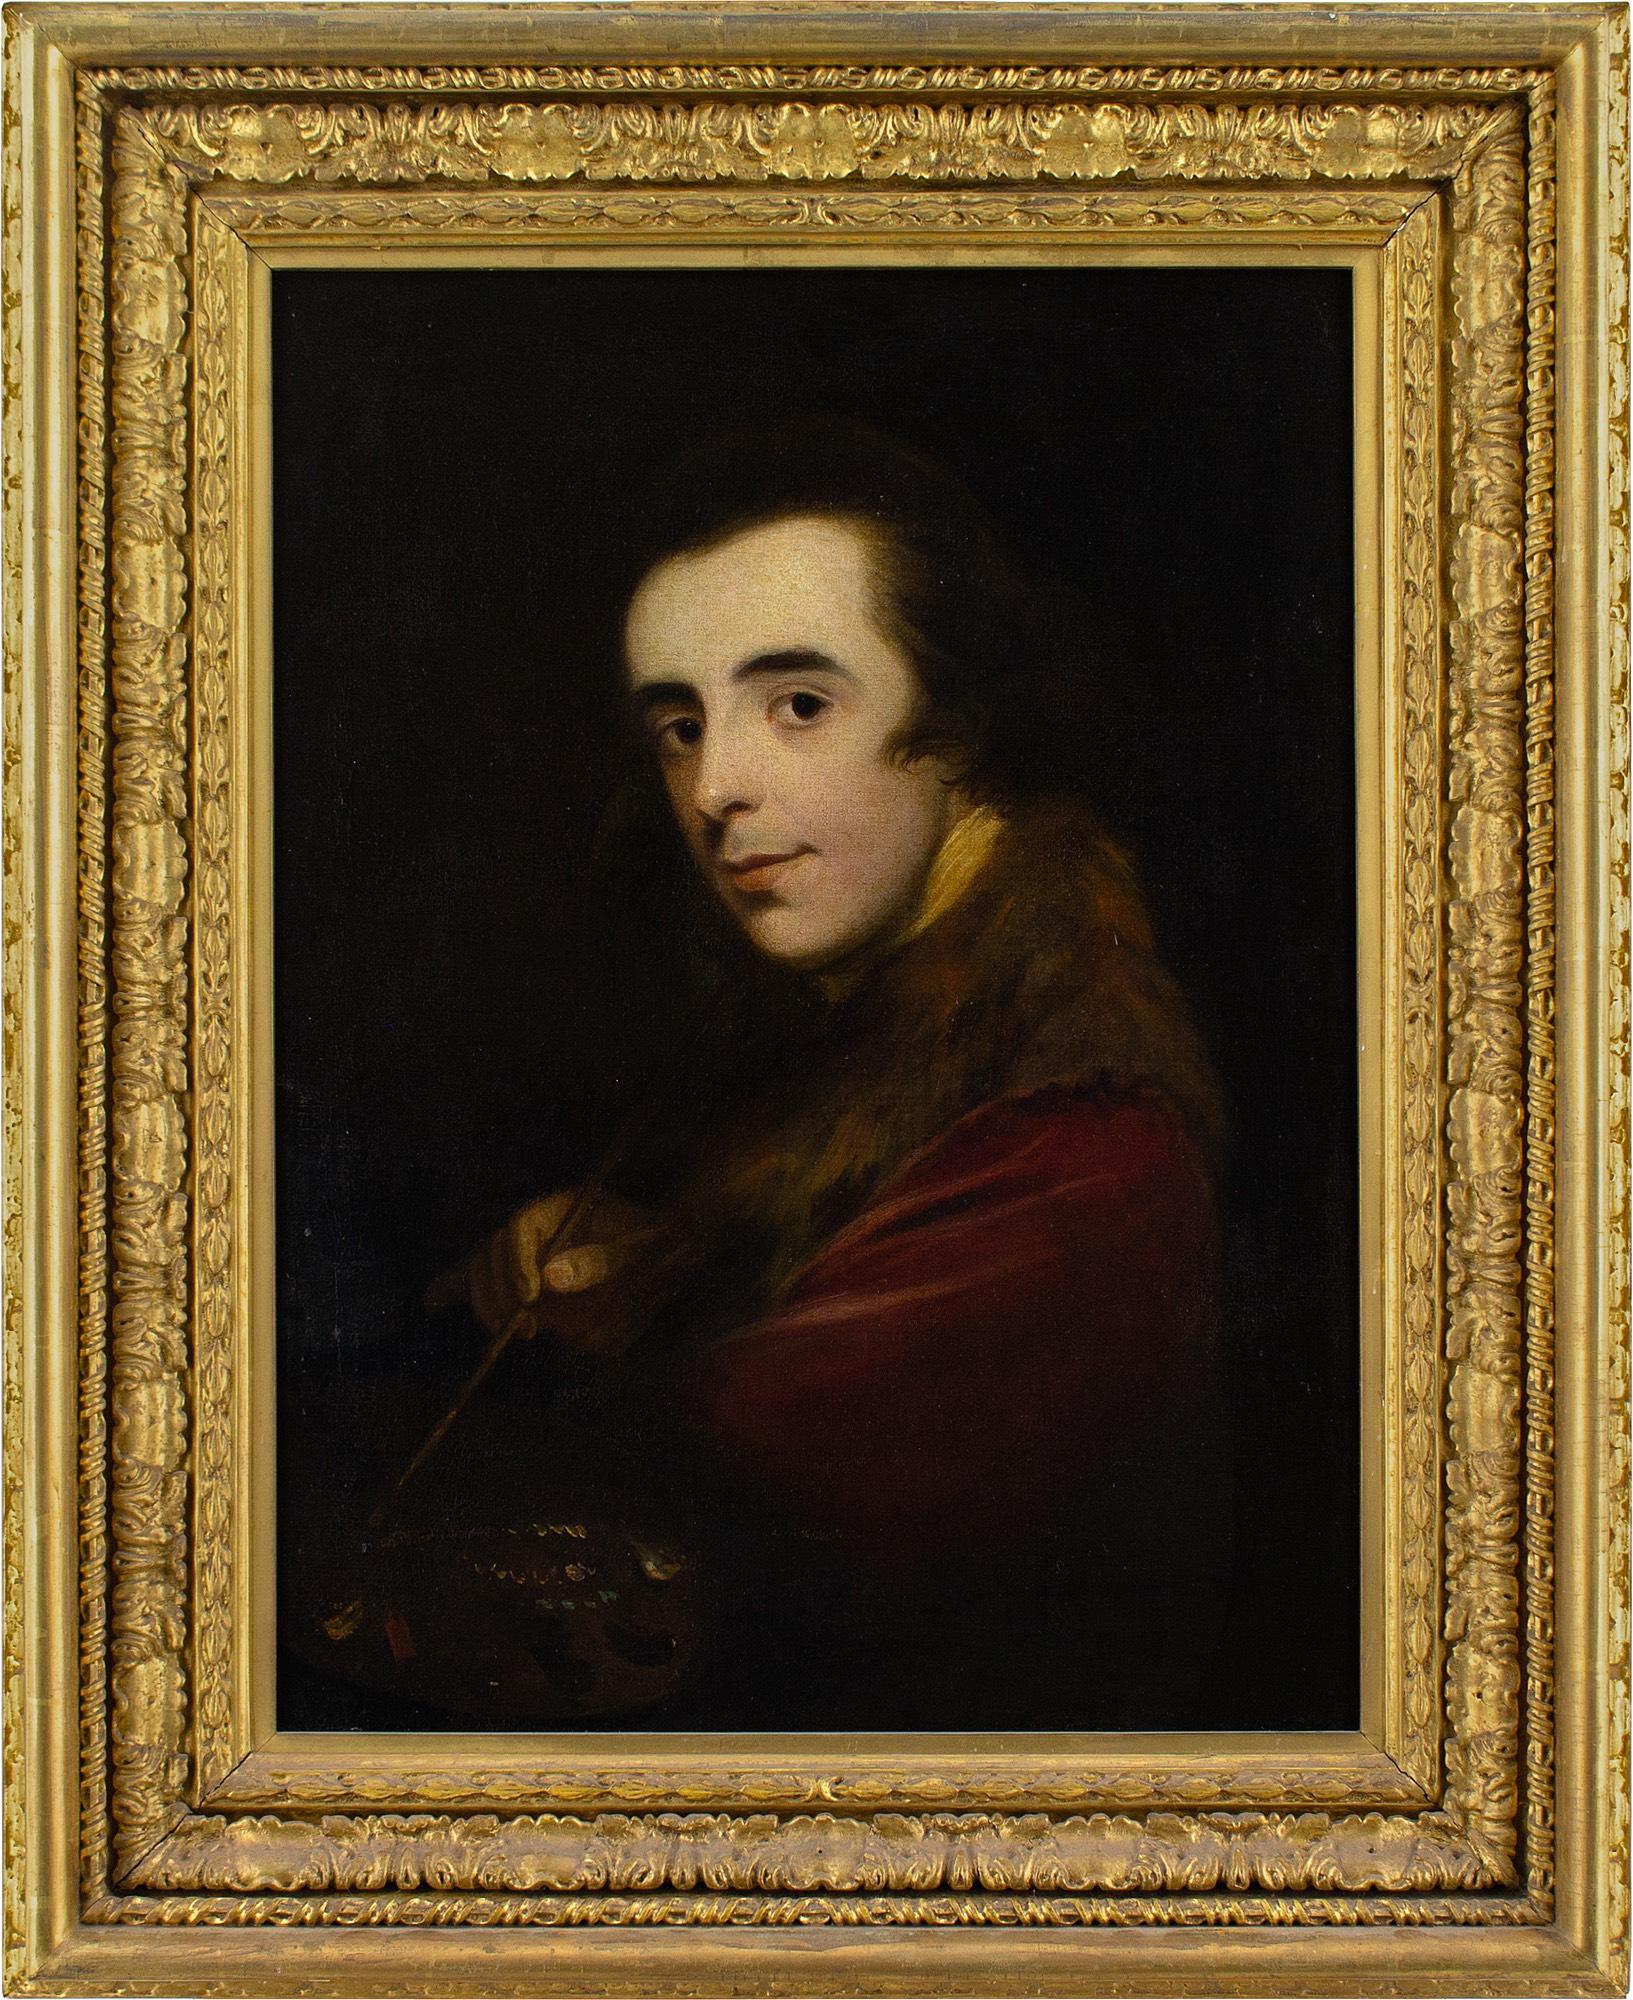 This mid-18th-century oil painting by James Shaw (1736-aft.1787) depicts the artist with a palette and brush. It formerly hung at The Wodehouse, a grade II listed country manor house in Staffordshire.

Lavishly attired in a decadent fur-trimmed red